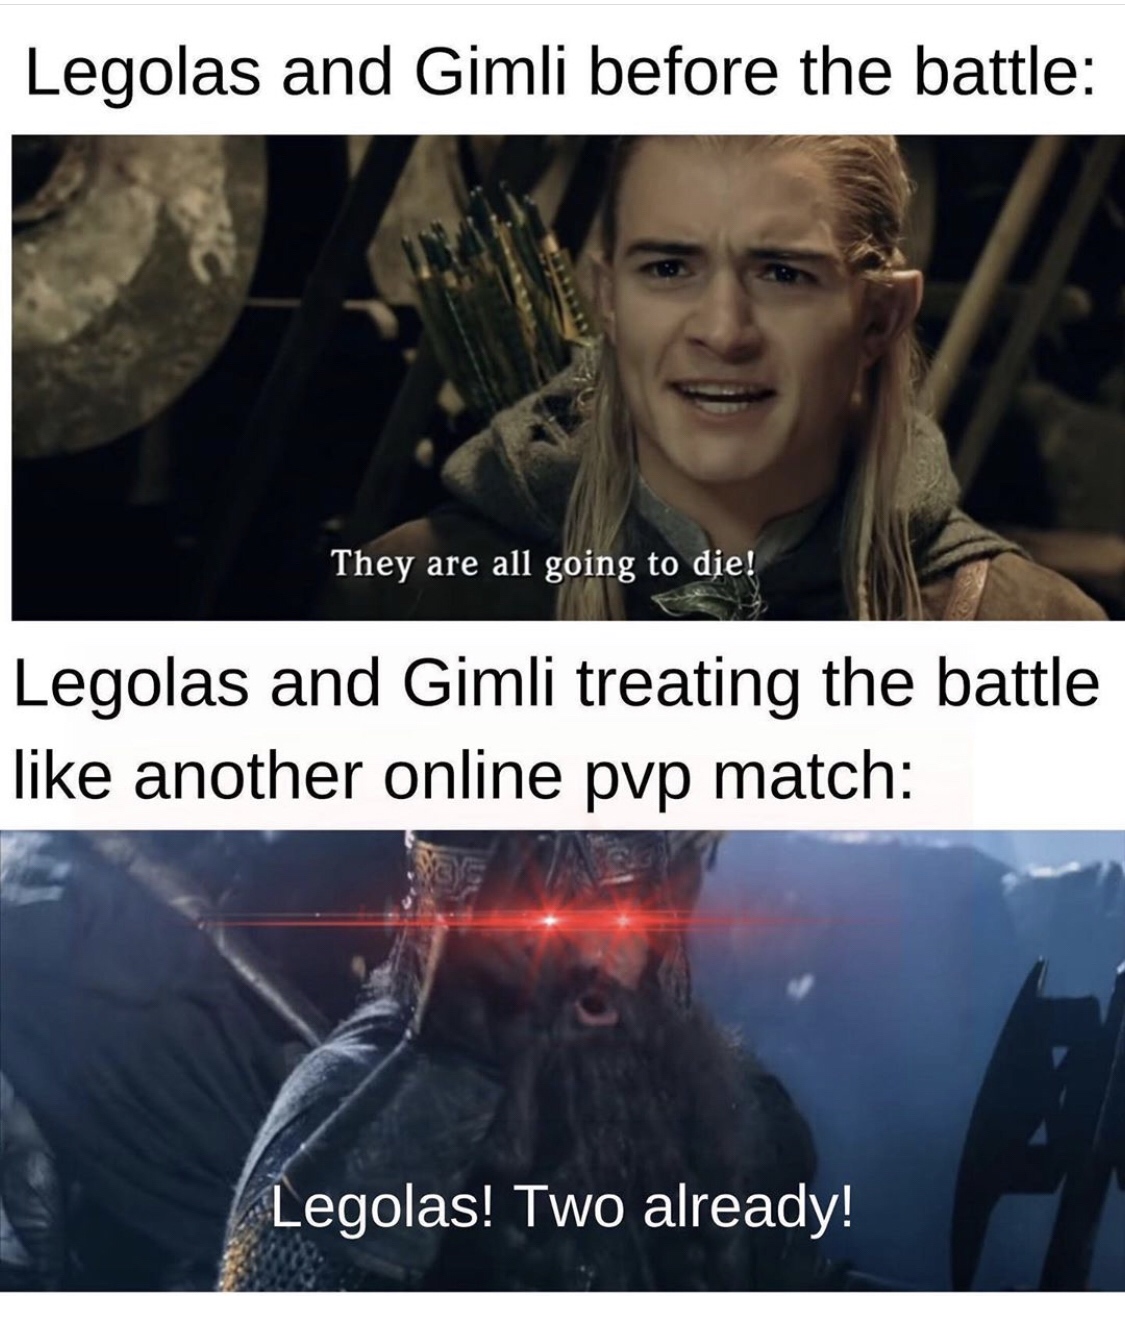 legolas and gimli meme - Legolas and Gimli before the battle They are all going to die! Legolas and Gimli treating the battle another online pvp match Legolas! Two already!